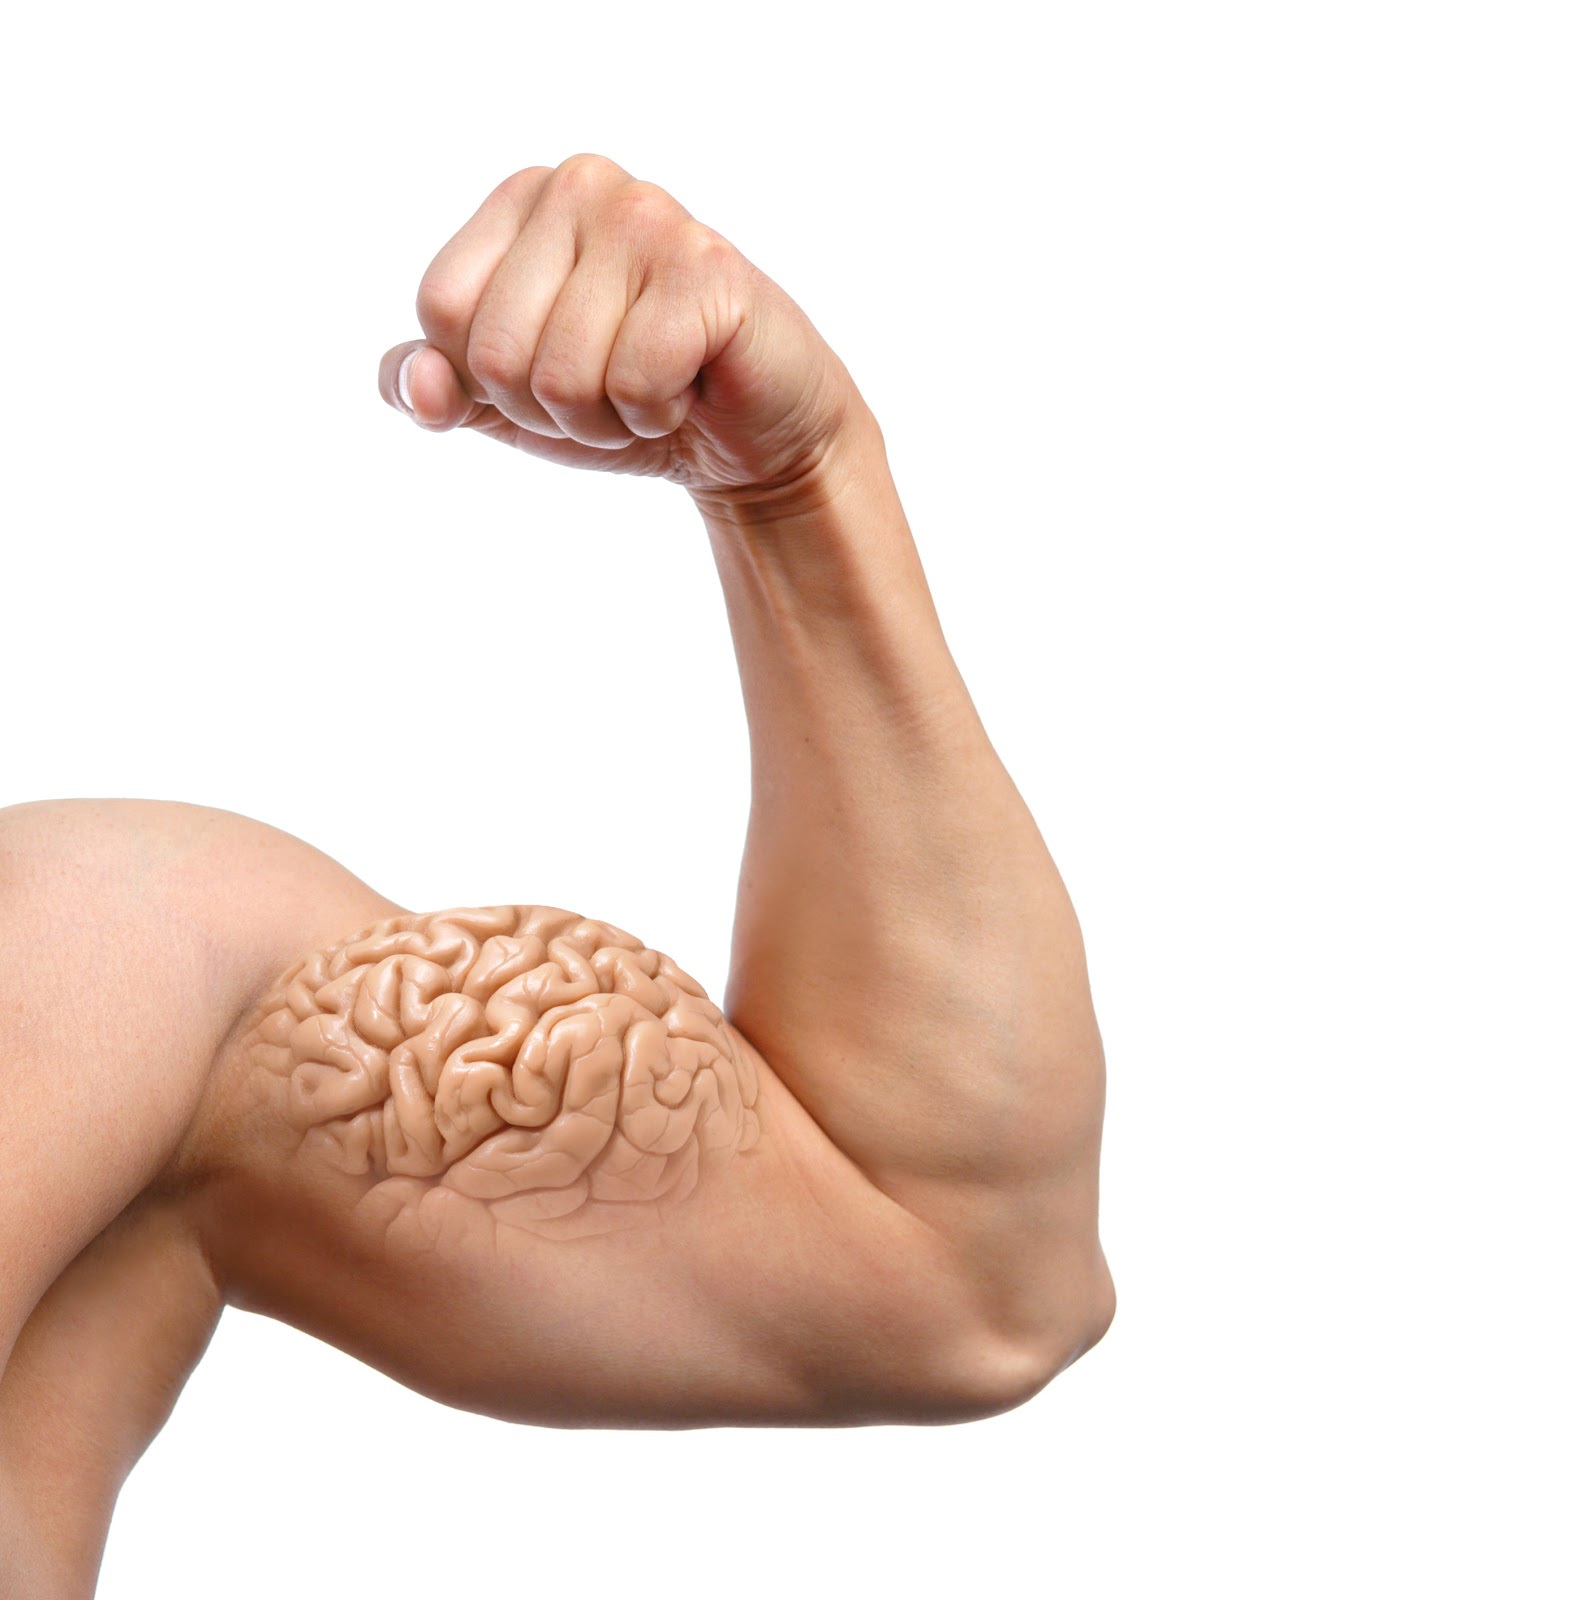 Can Working Out Make You Smarter?